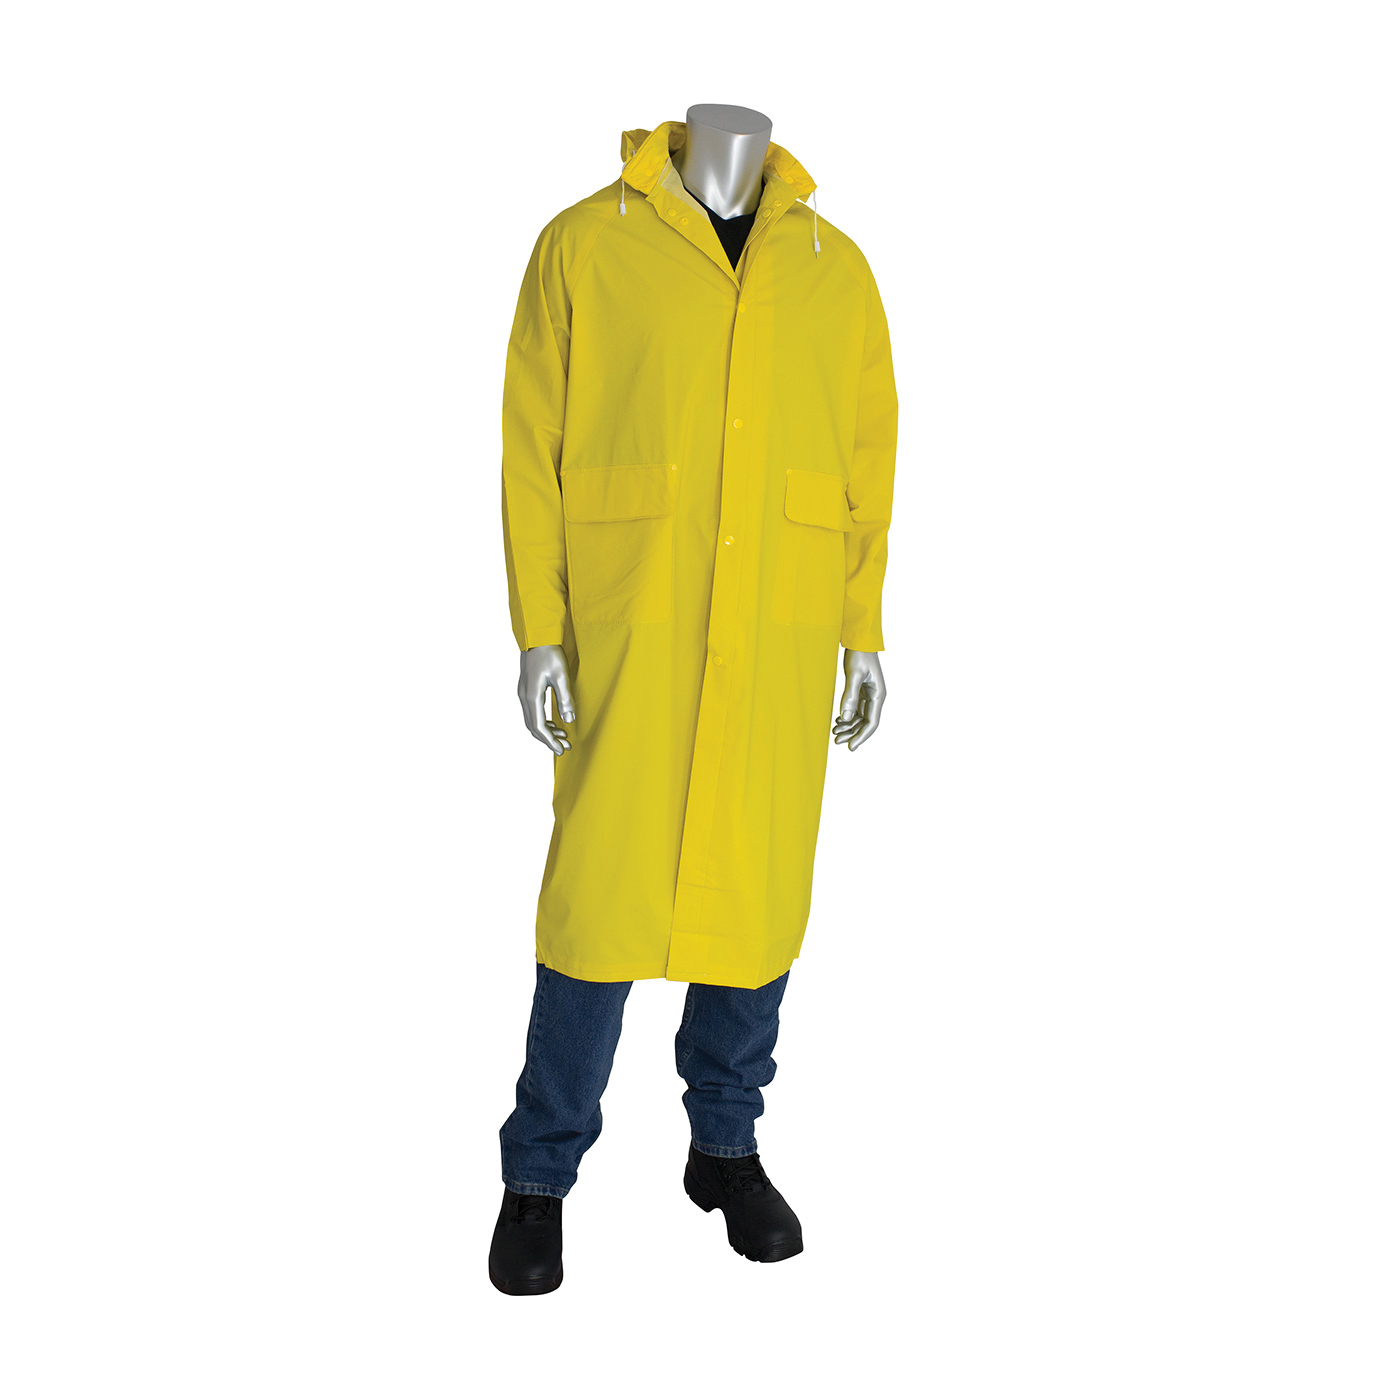 PIP® FALCON™ Base35™ 201-300L 2-Piece Premium Waterproof Rain Coat, Unisex, L, Yellow, Corduroy/Polyester/PVC, Resists: Chemical and Water